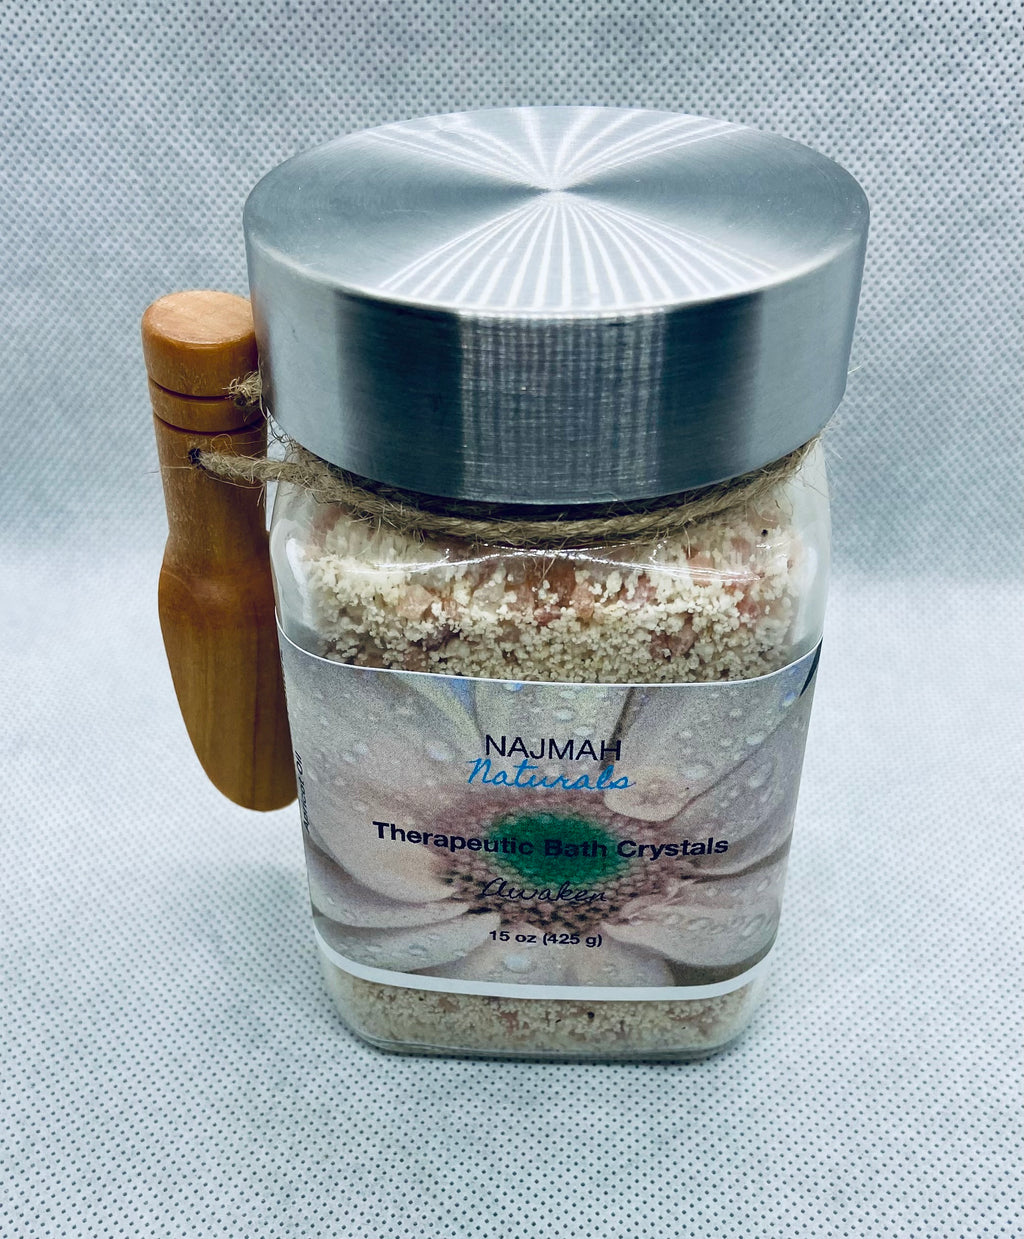 Our Awaken Therapeutic Bath Crystals are the ultimate reviving, self care herbal salts with Epson Salt, Himalayan Pink Salt, Sodium Bicarbonate (Aluminum-Free), Organic Essential Oils, Calendula Officinalis Flowers and Apricot Oil.